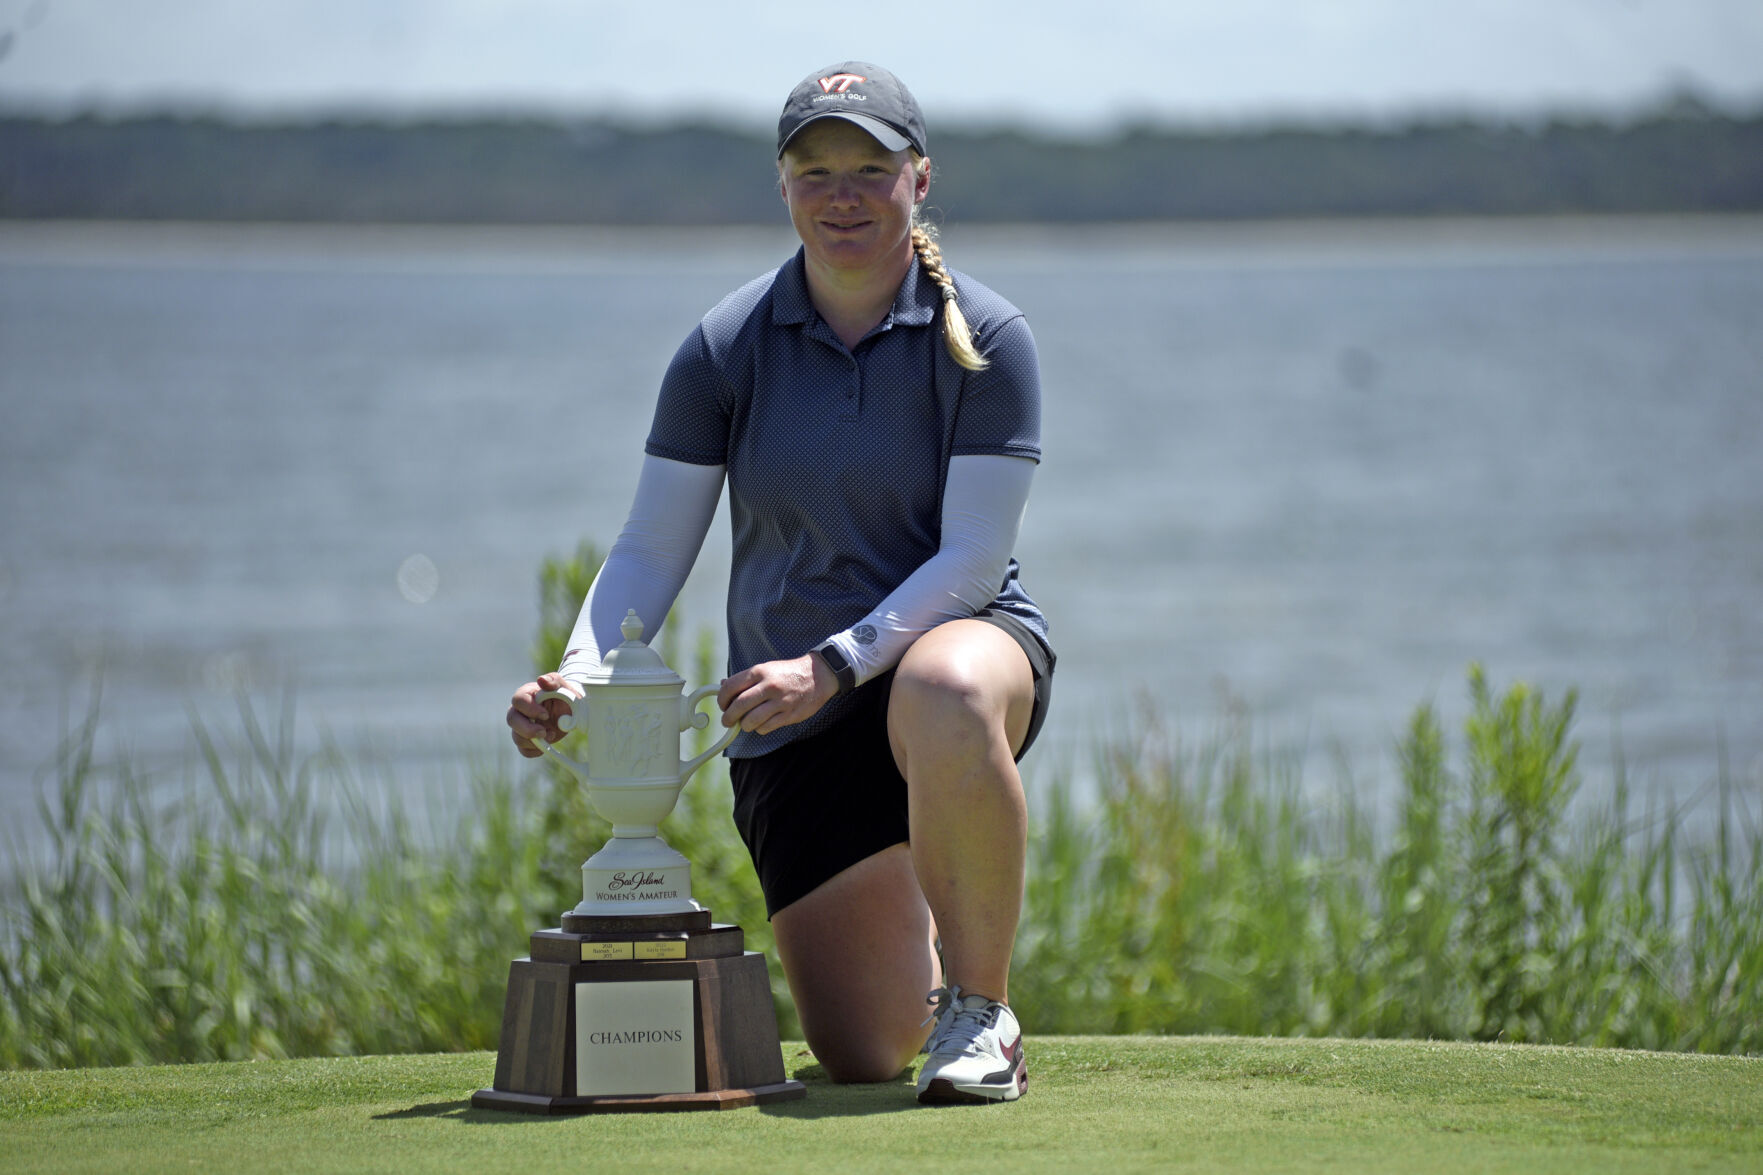 DOWN BUT NOT OUT Virginia Techs Morgan Ketchum comes from eight shots back to win Sea Island Womens Amateur Local Sports thebrunswicknews pic